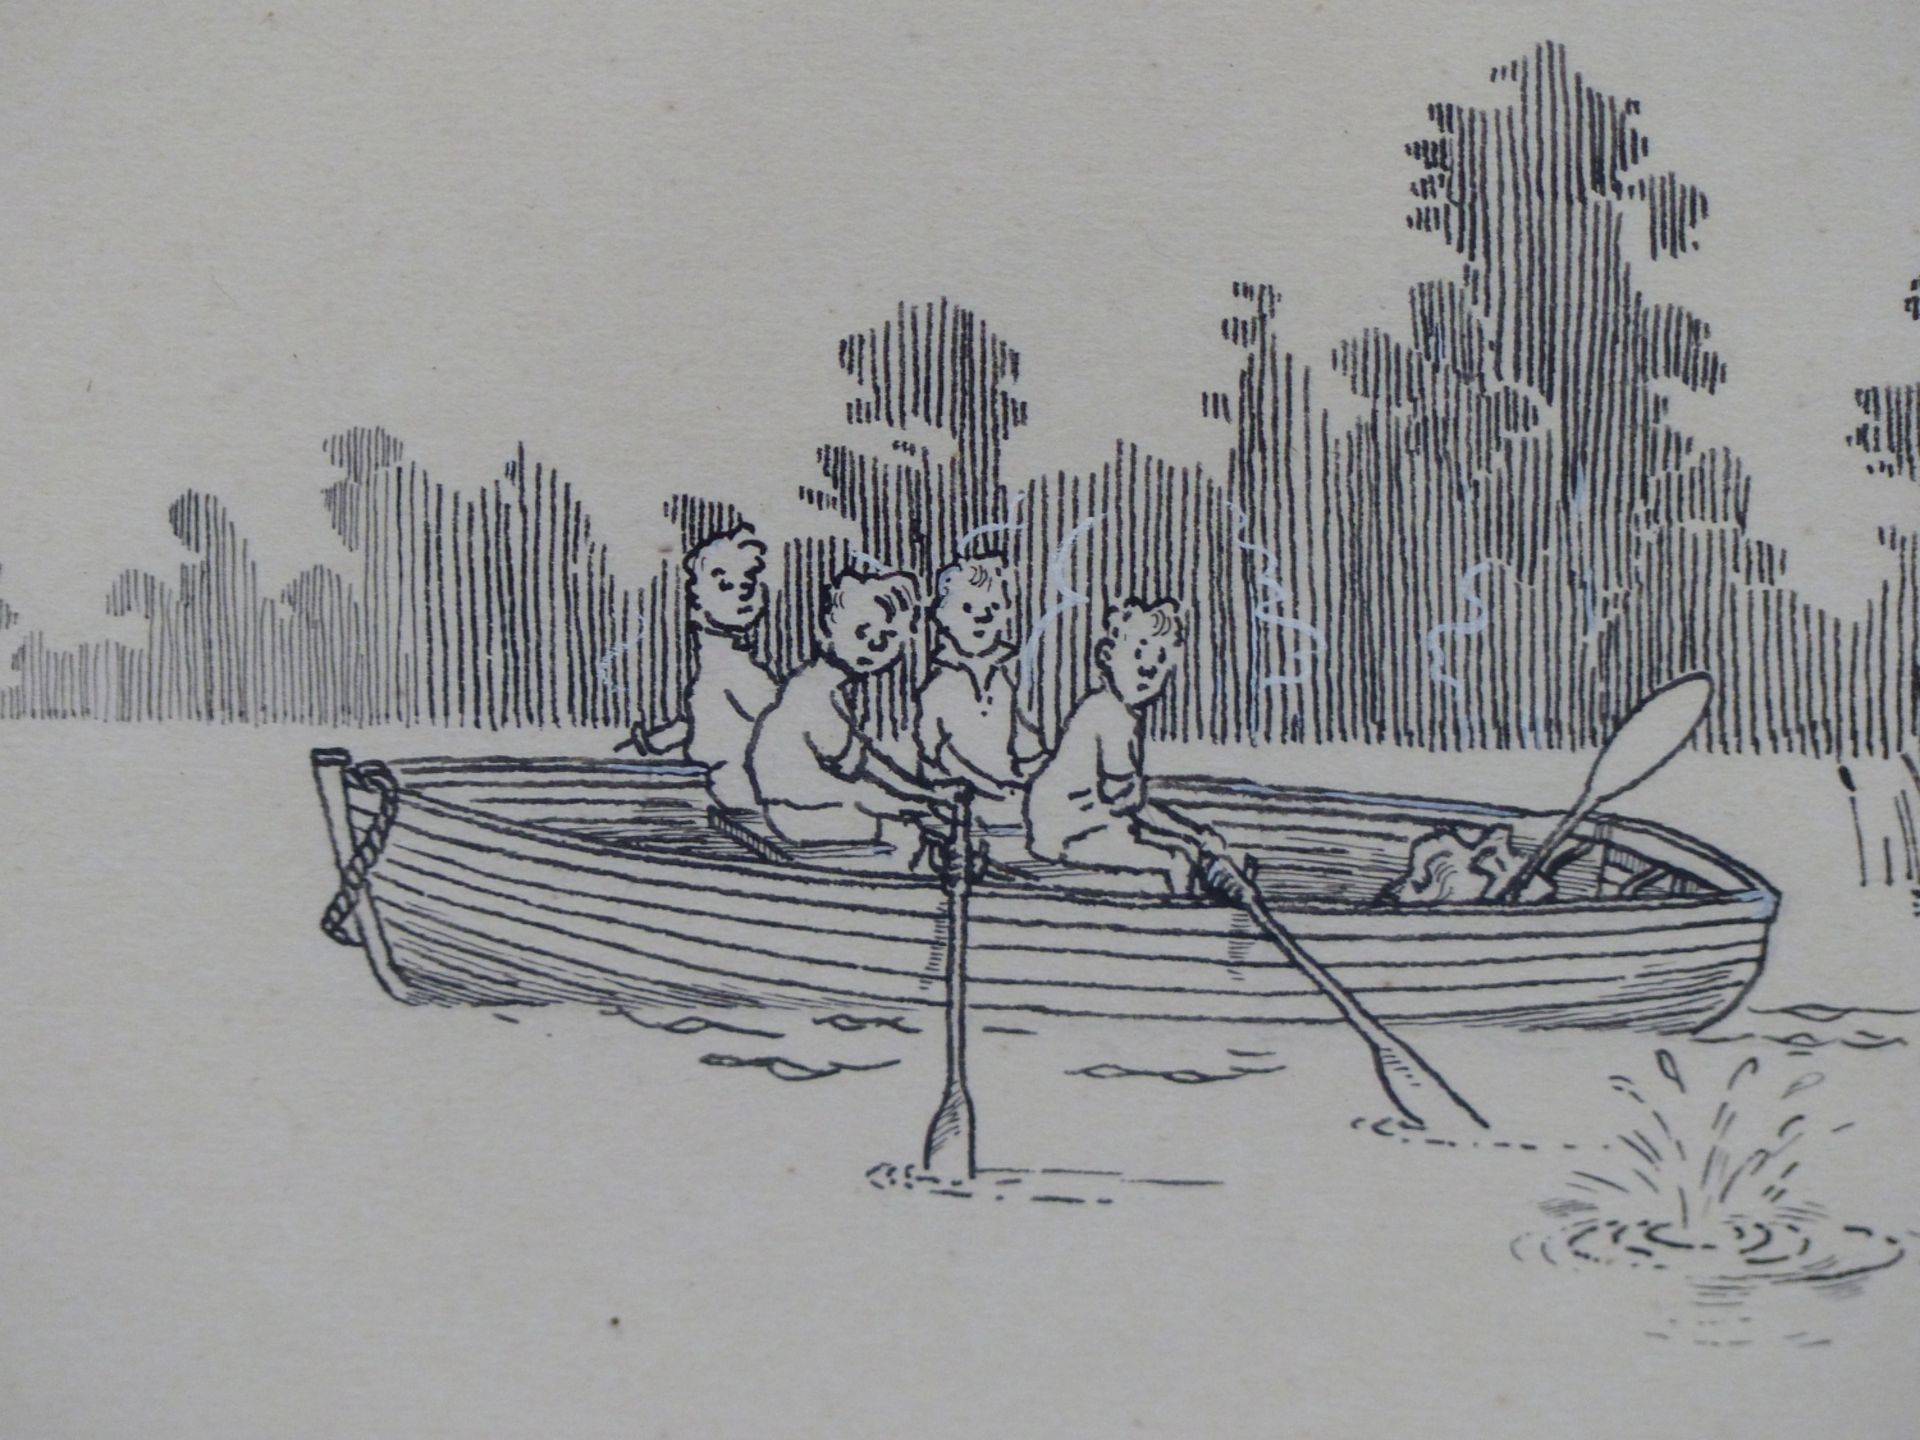 NICHOLAS GARLAND (B.1935) ARR. FOUR BOYS IN A ROW BOAT, PEN AND INK CARTOON. SIGNED LOWER RIGHT. 29 - Image 3 of 4